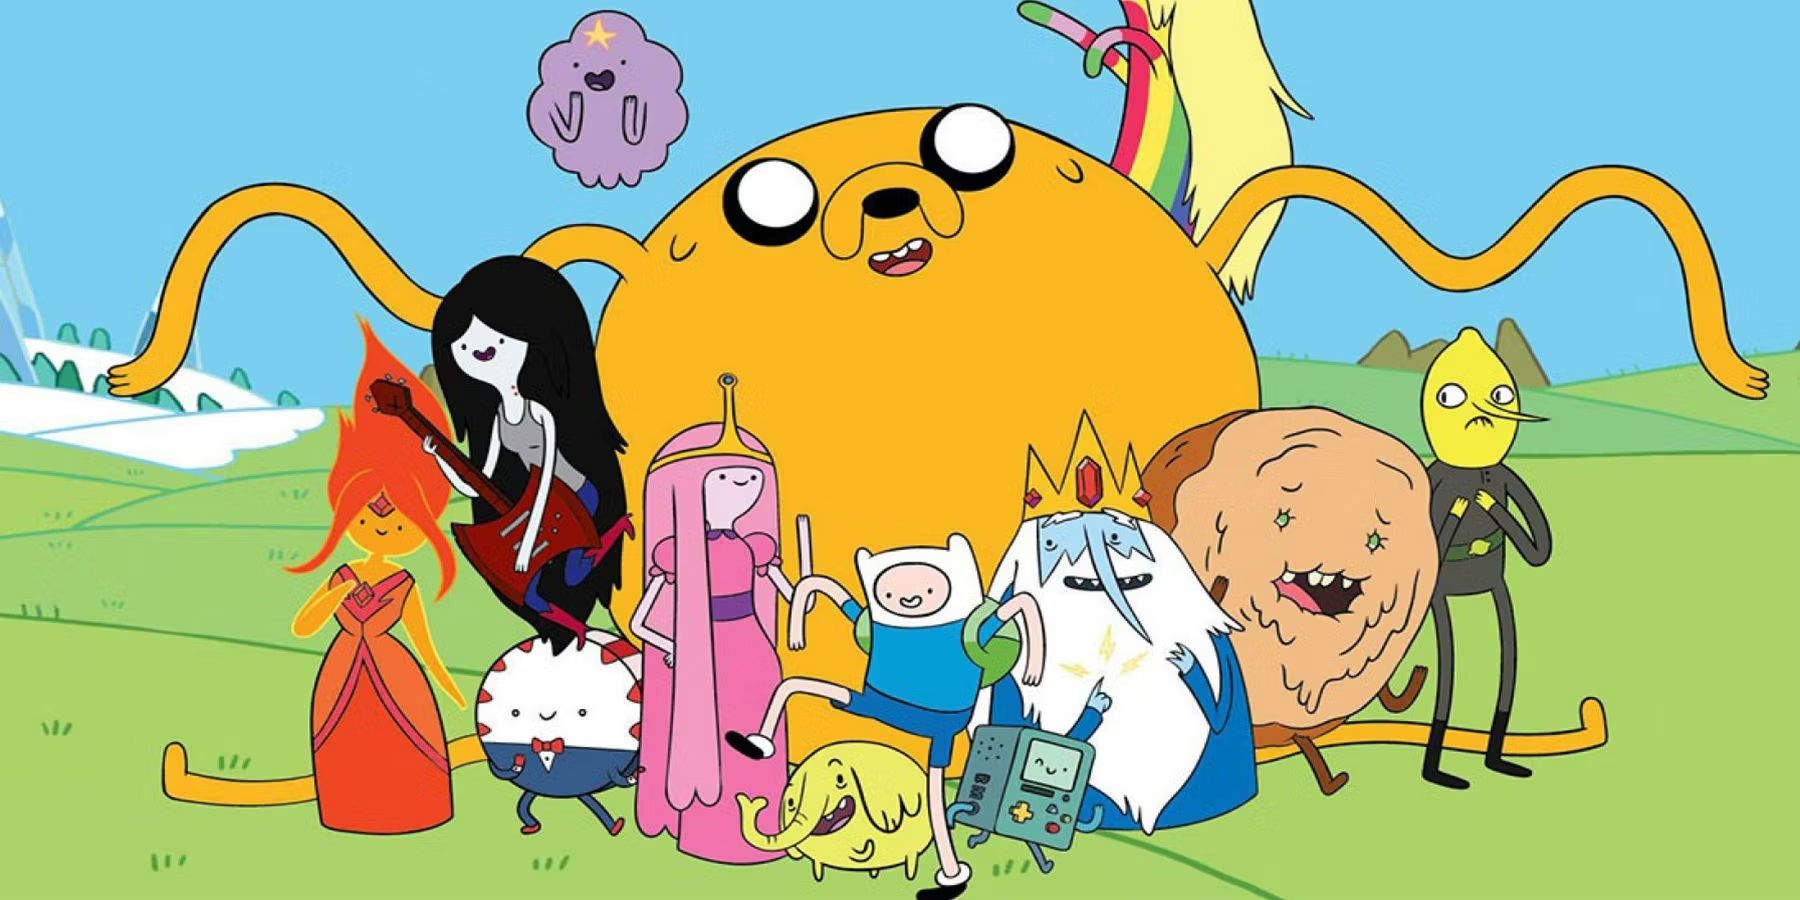 The characters of Adventure Time